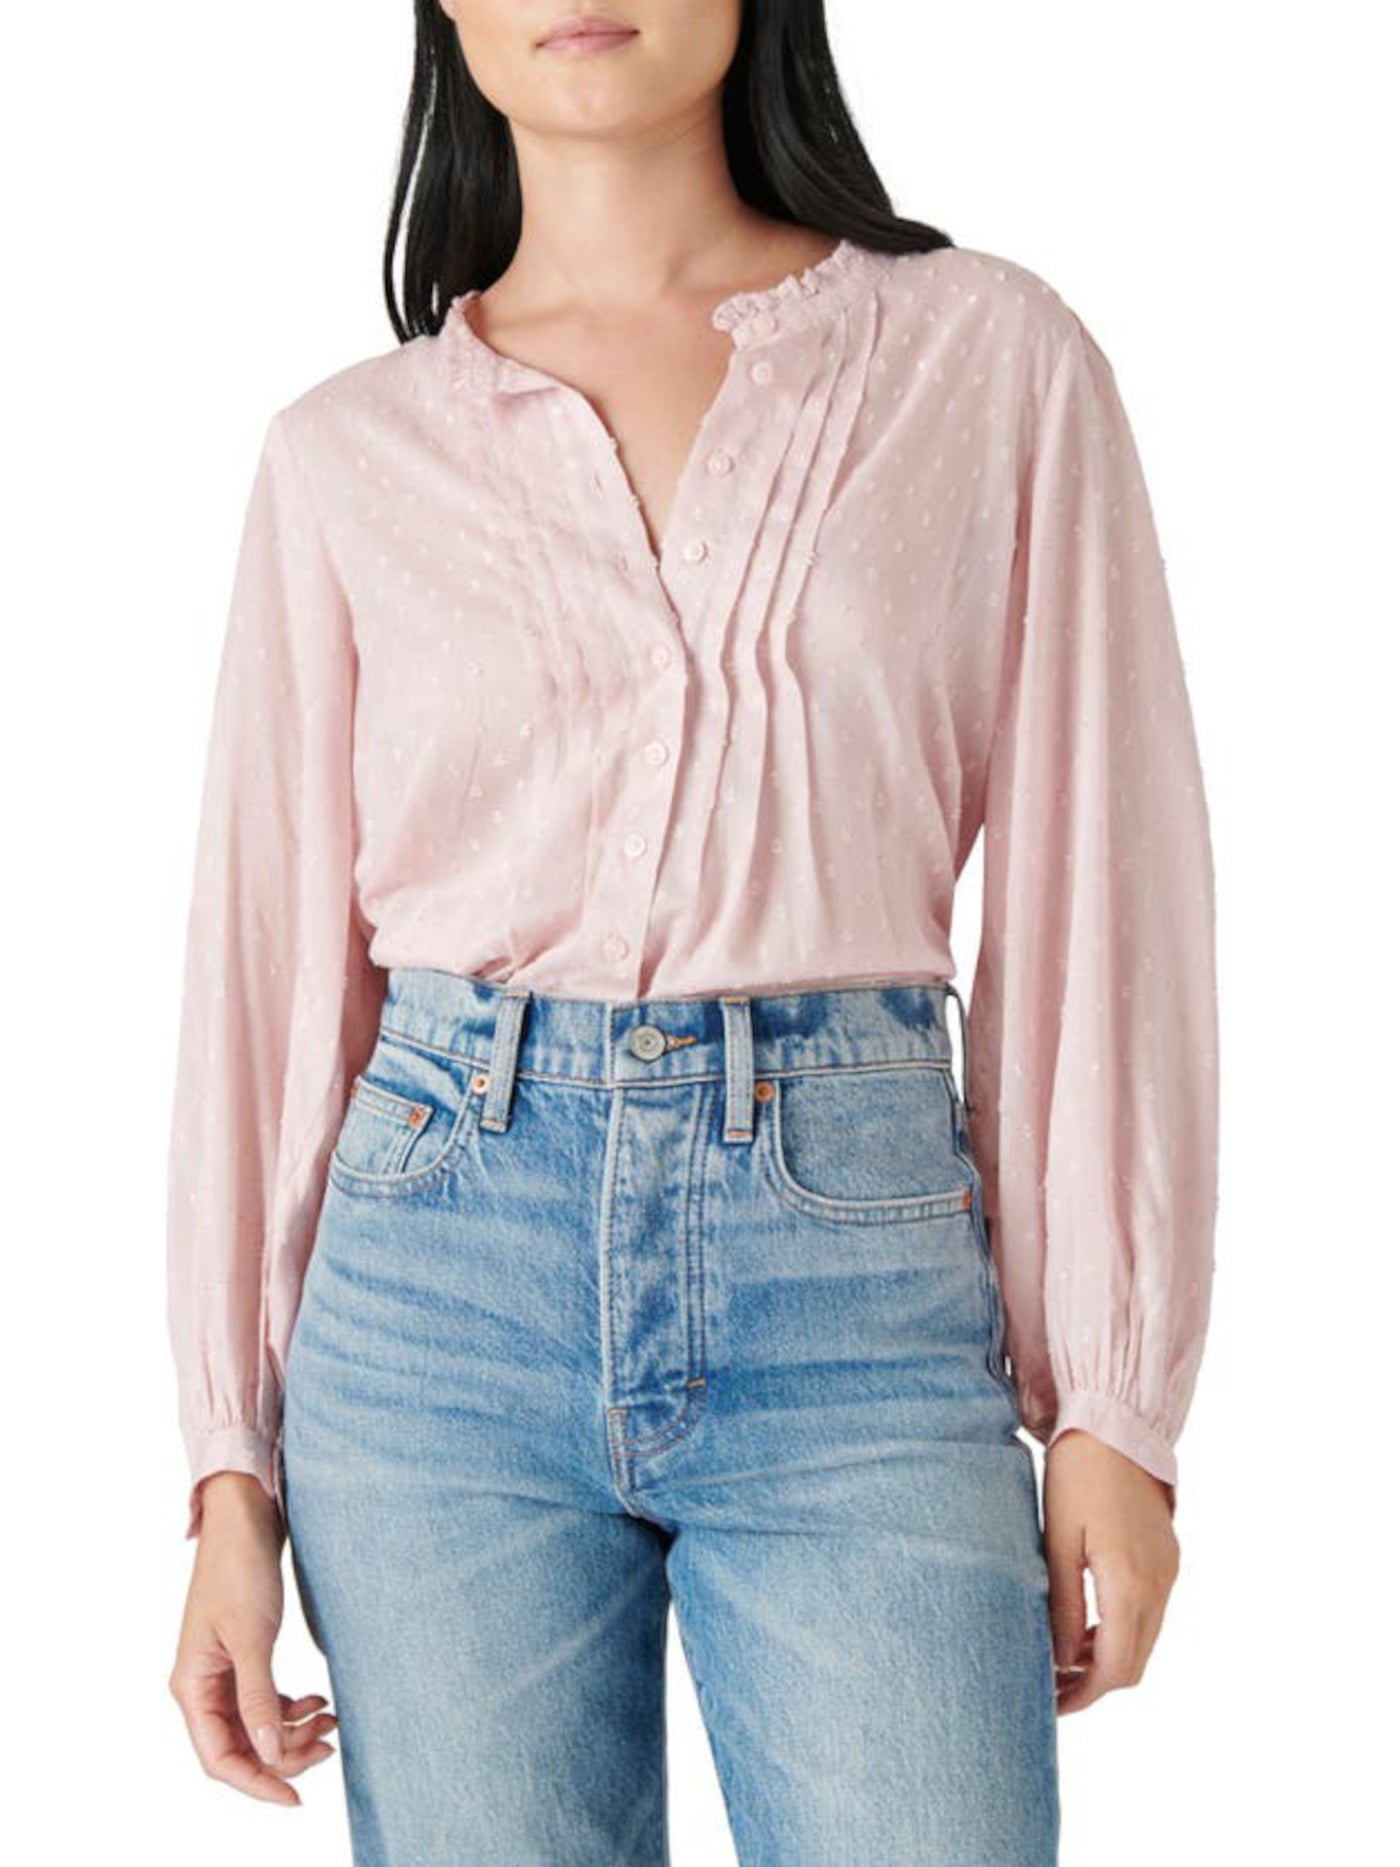 LUCKY BRAND Womens Pink Ruffled Pintucked Cuffed Sleeve Round Neck Wear To Work Button Up Top XS